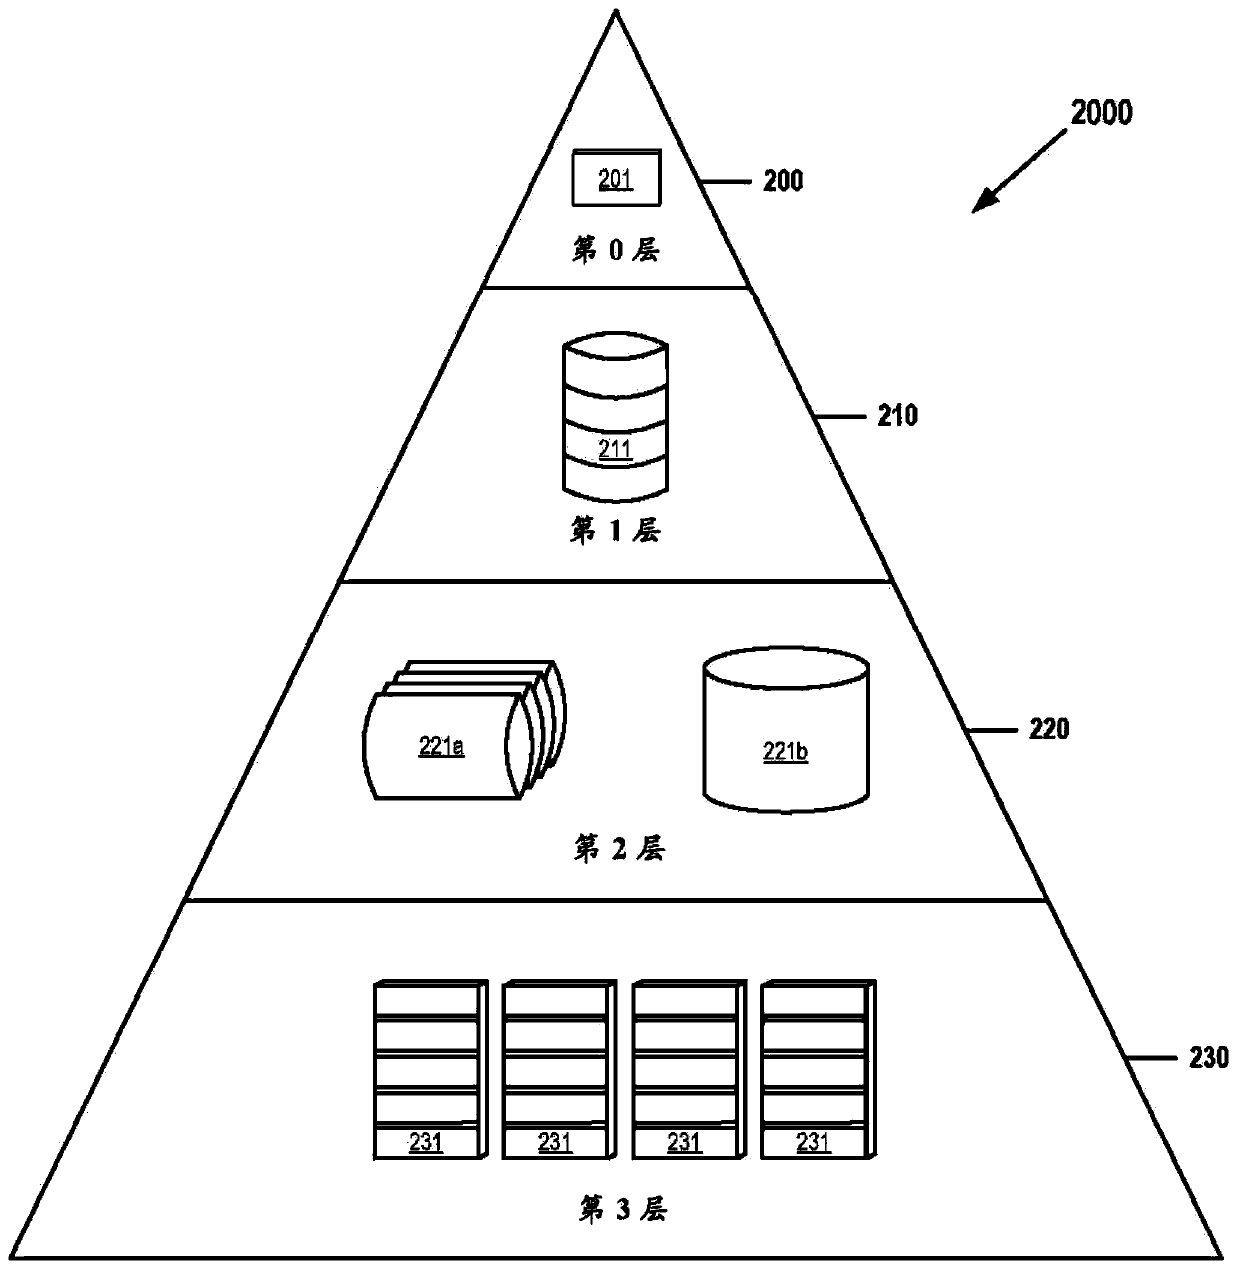 Optimizing user satisfaction when training a cognitive hierarchical storage-management system